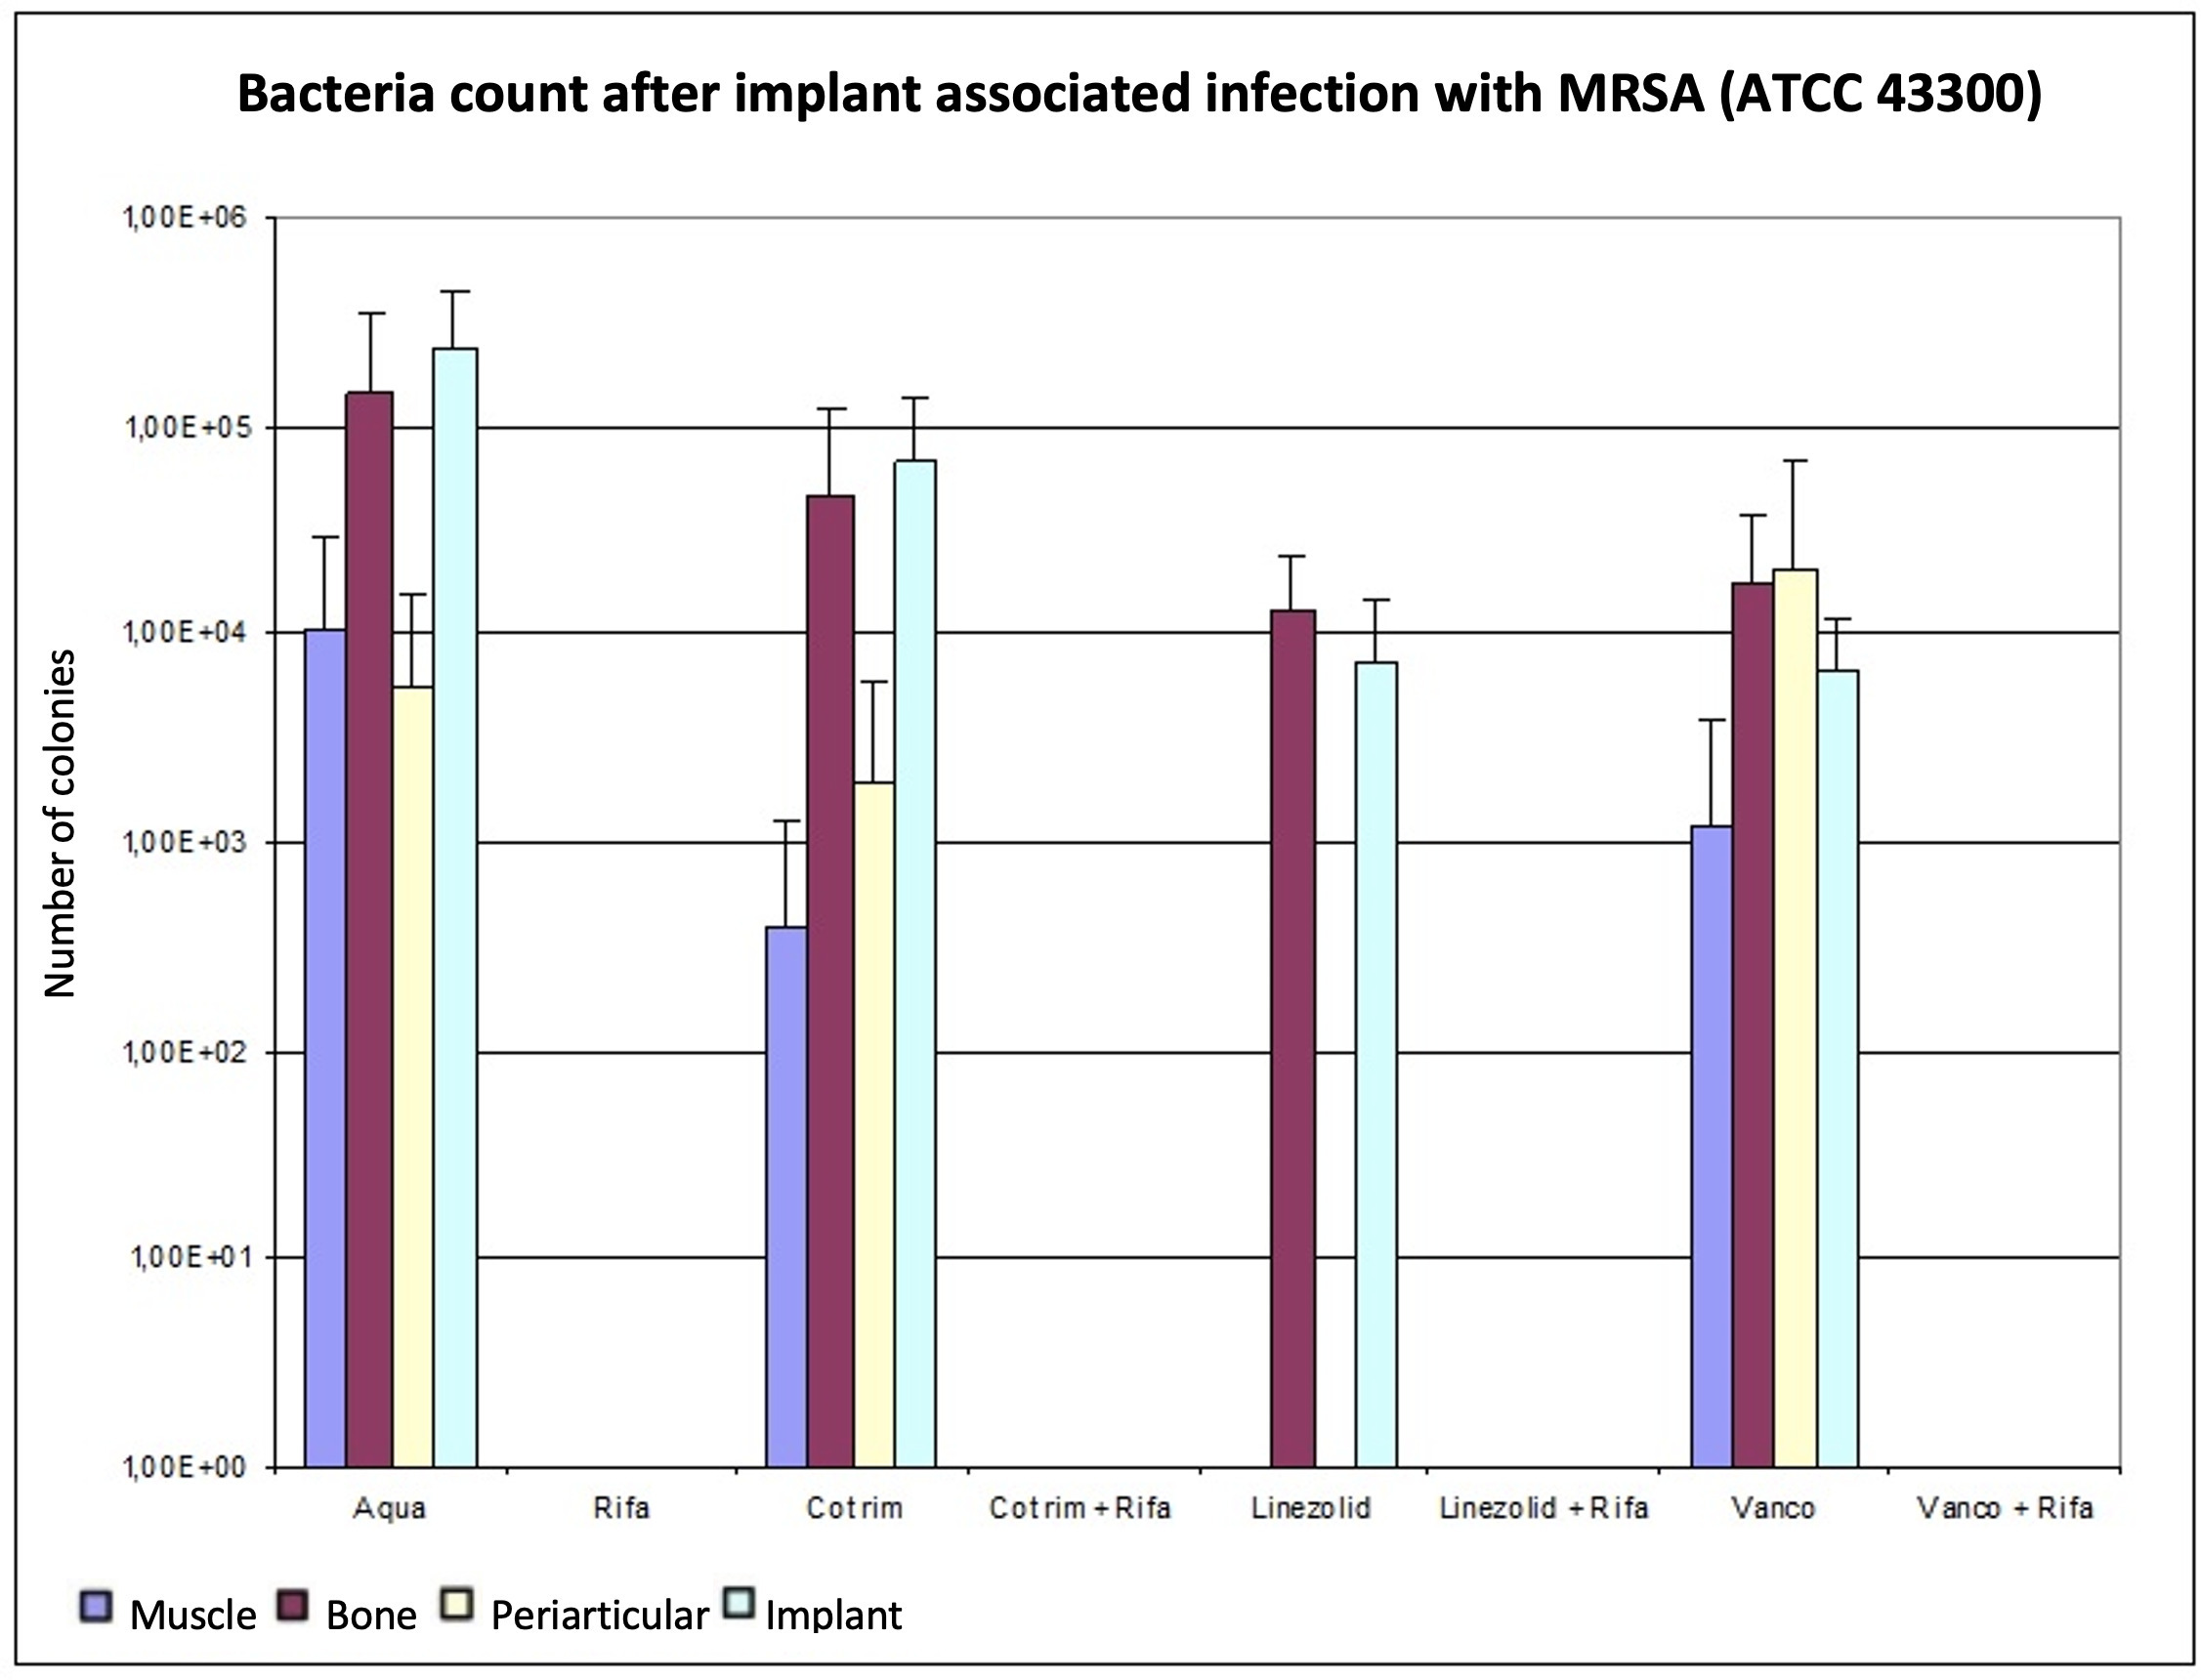 Fig. 2 
          Determination of the bacterial count in tissue with methicillin-resistant Staphylococcus aureus (MRSA) (ATCC 43300), expressed as mean value and standard deviation. The bacterial count is expressed in the tissue in colony-forming units (CFUs)/g and in the implant in CFUs/Implantat. The detection limit is 80 CFUs.
        